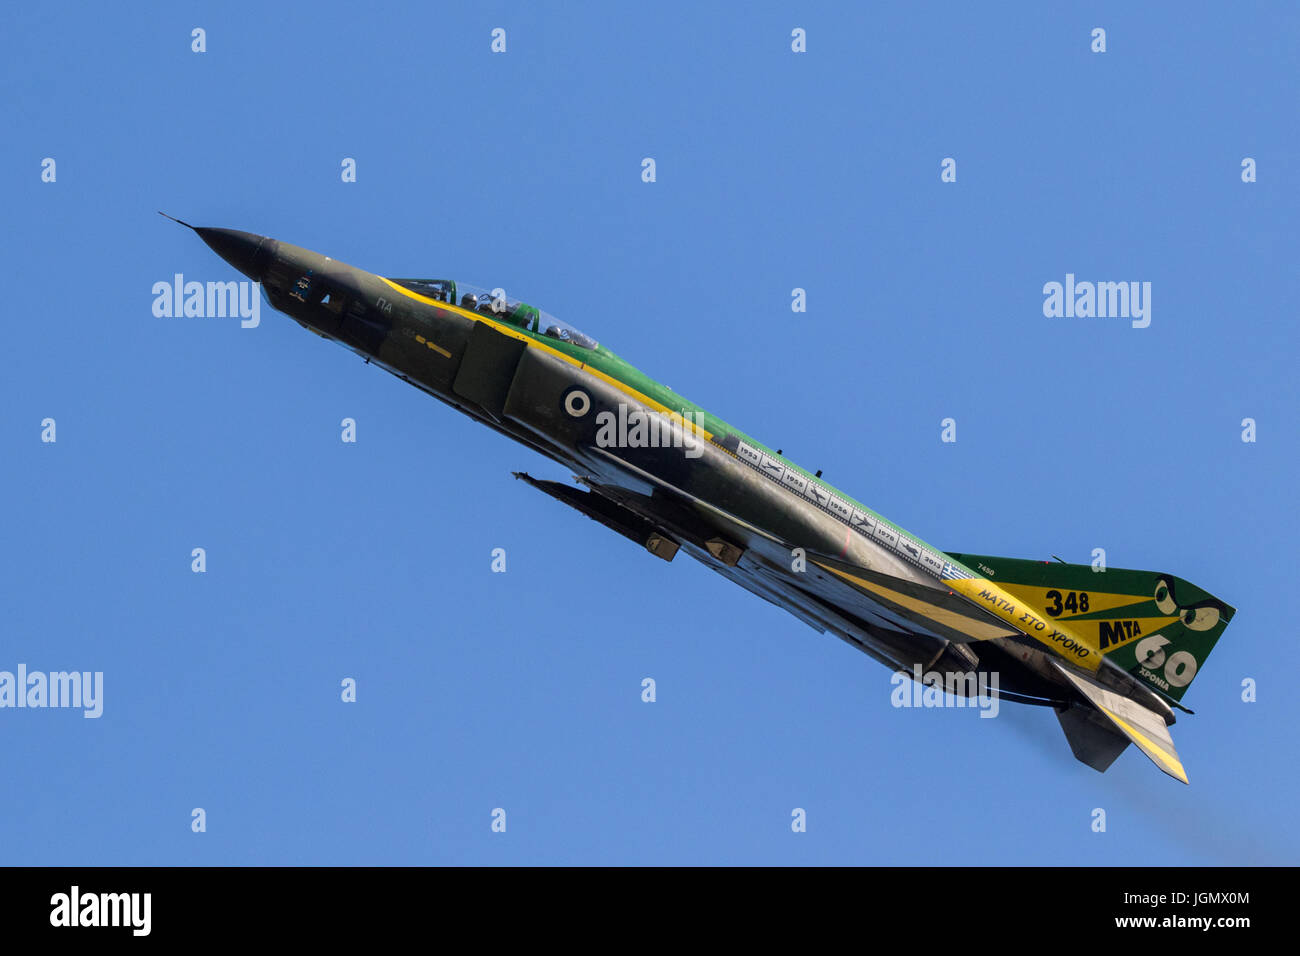 LARISSA, GREECE - MAY 4, 2017: Hellenic Air Force RF-4E Phantom II jet flyby on one of its last flights. 348 Reconnaissance Squadron suspends operatio Stock Photo